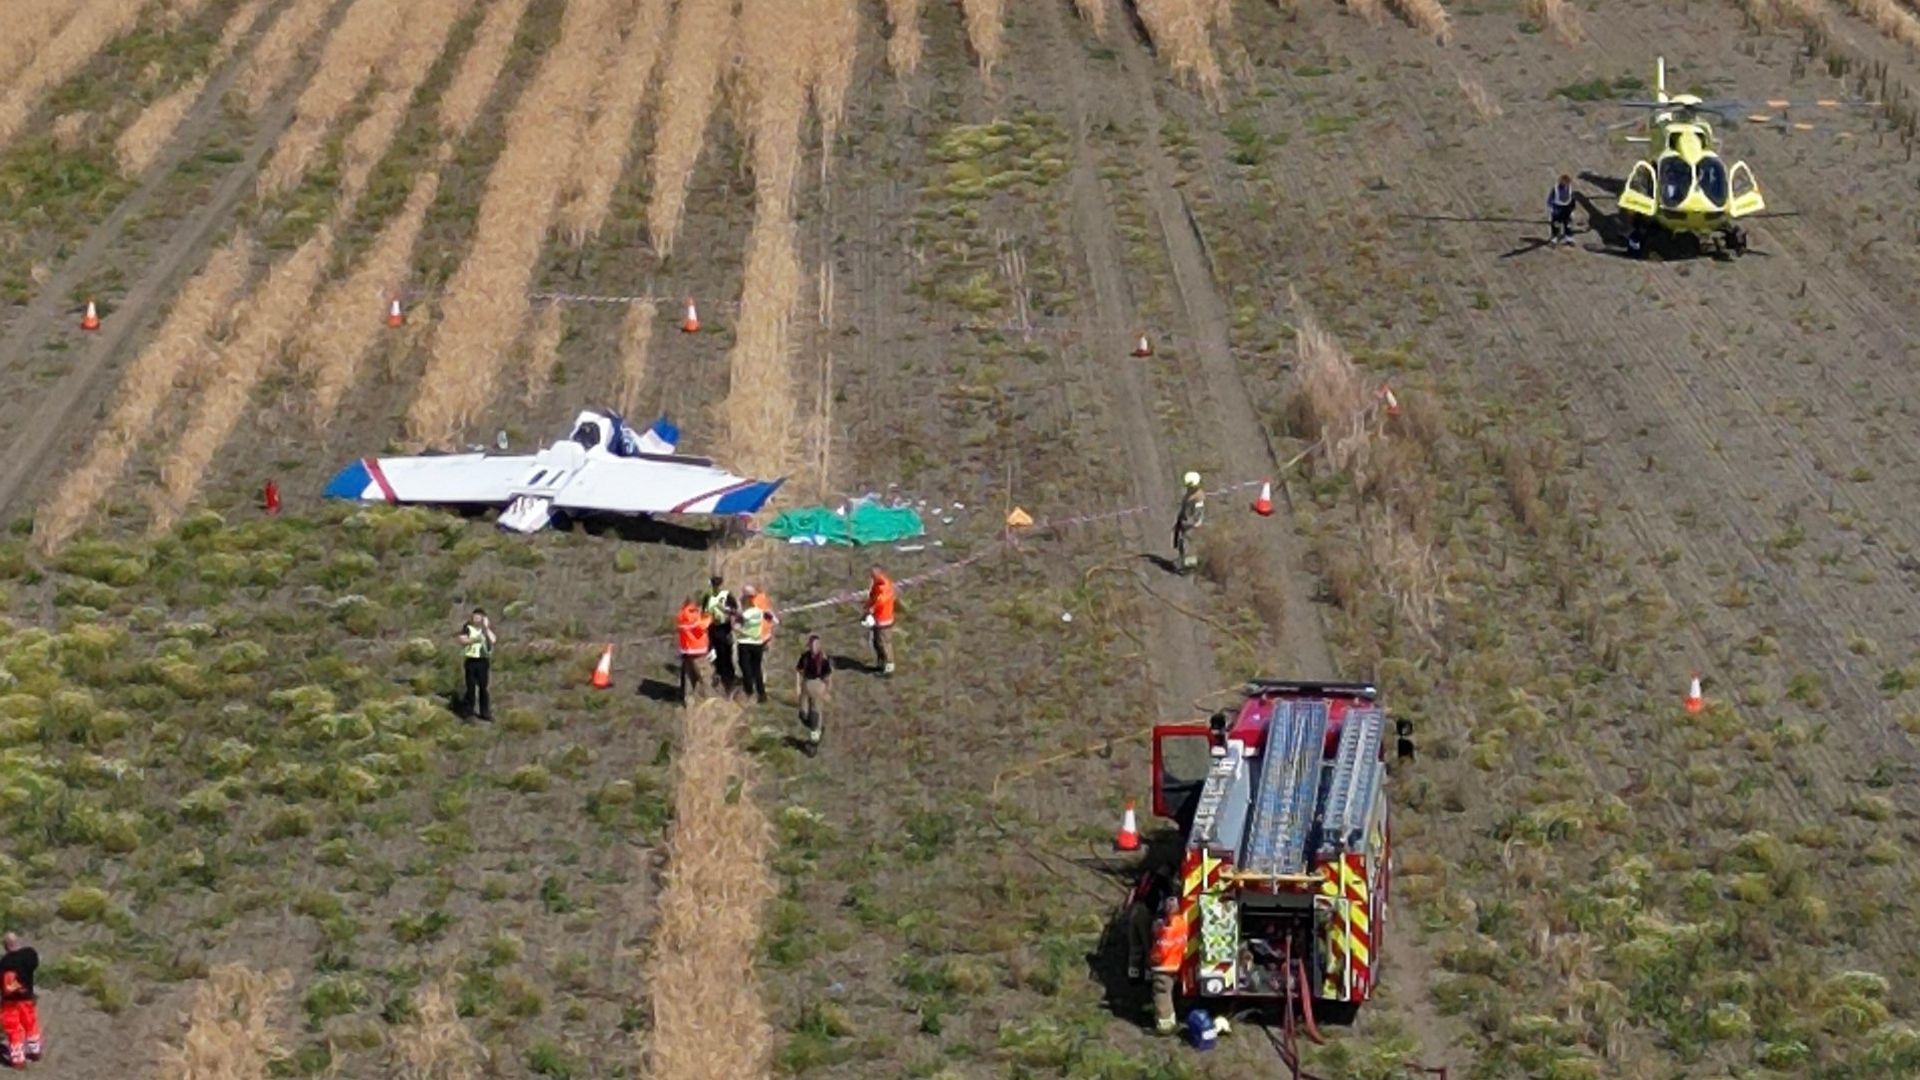 Two killed after light aircraft crashes into field